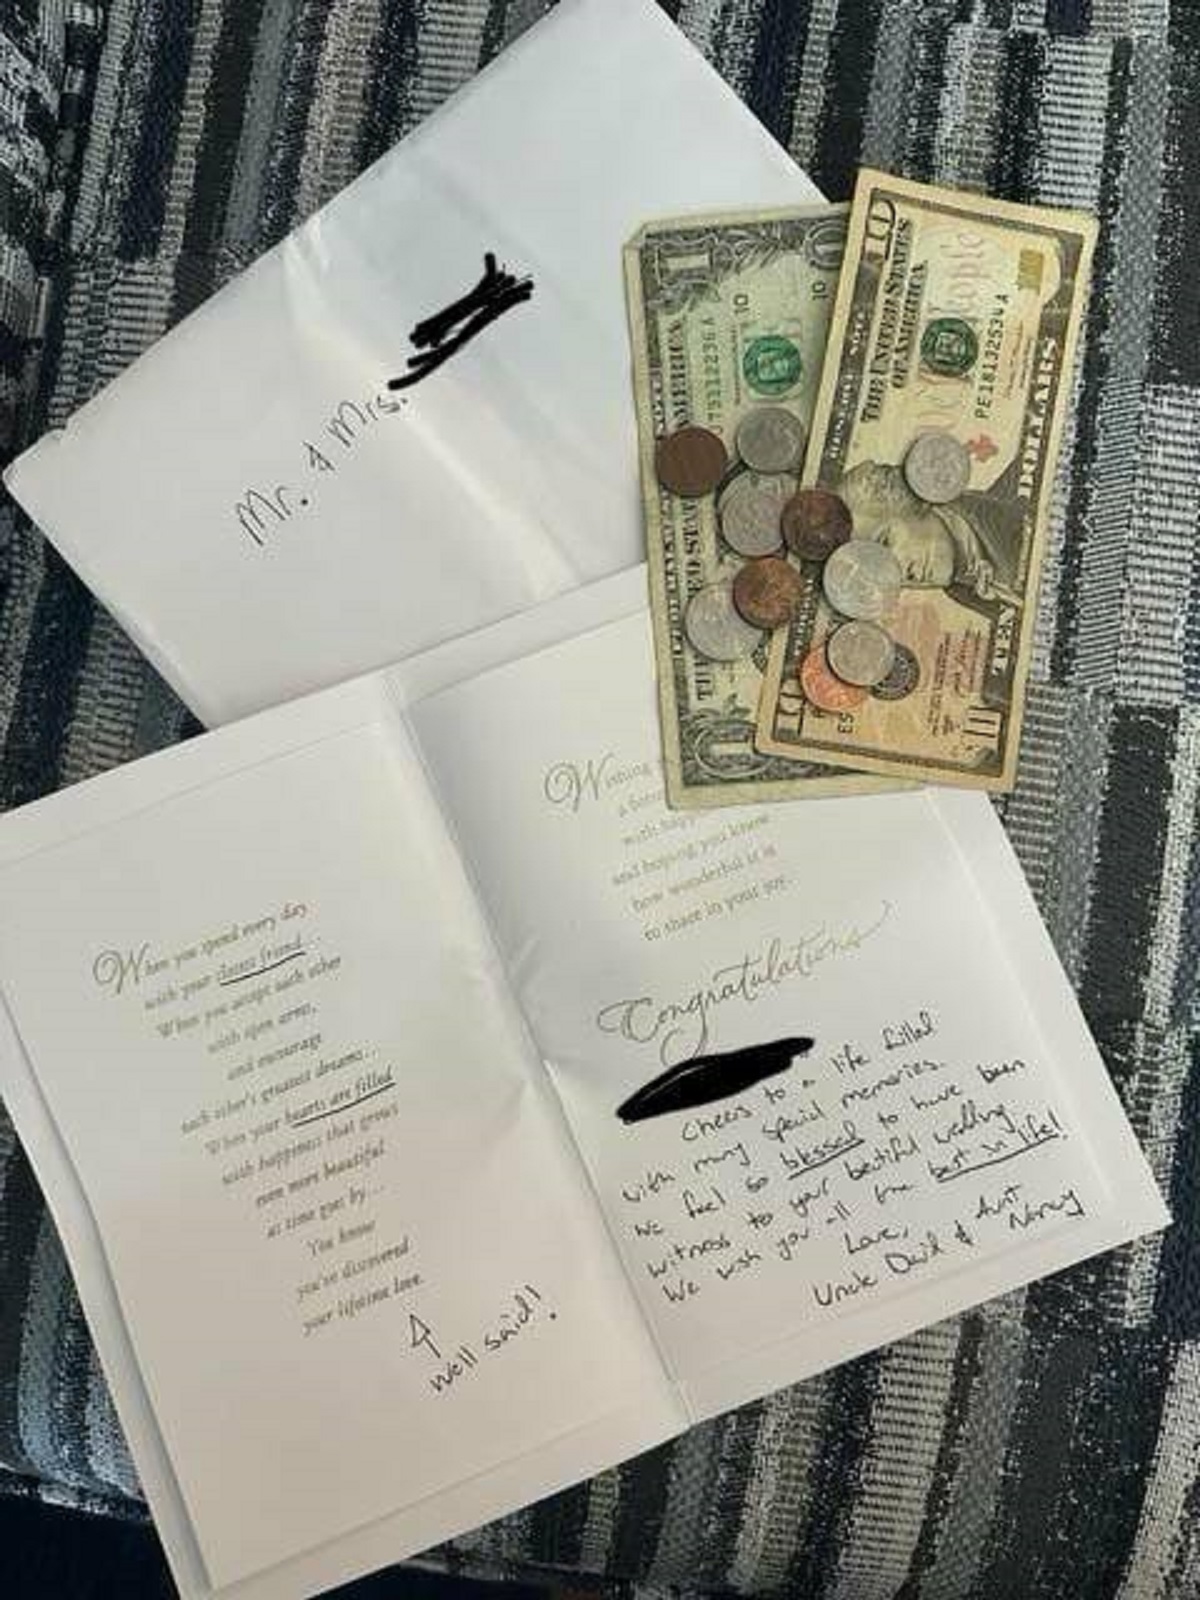 "The random couple who crashed my sister's wedding left a card with $11.54 inside"